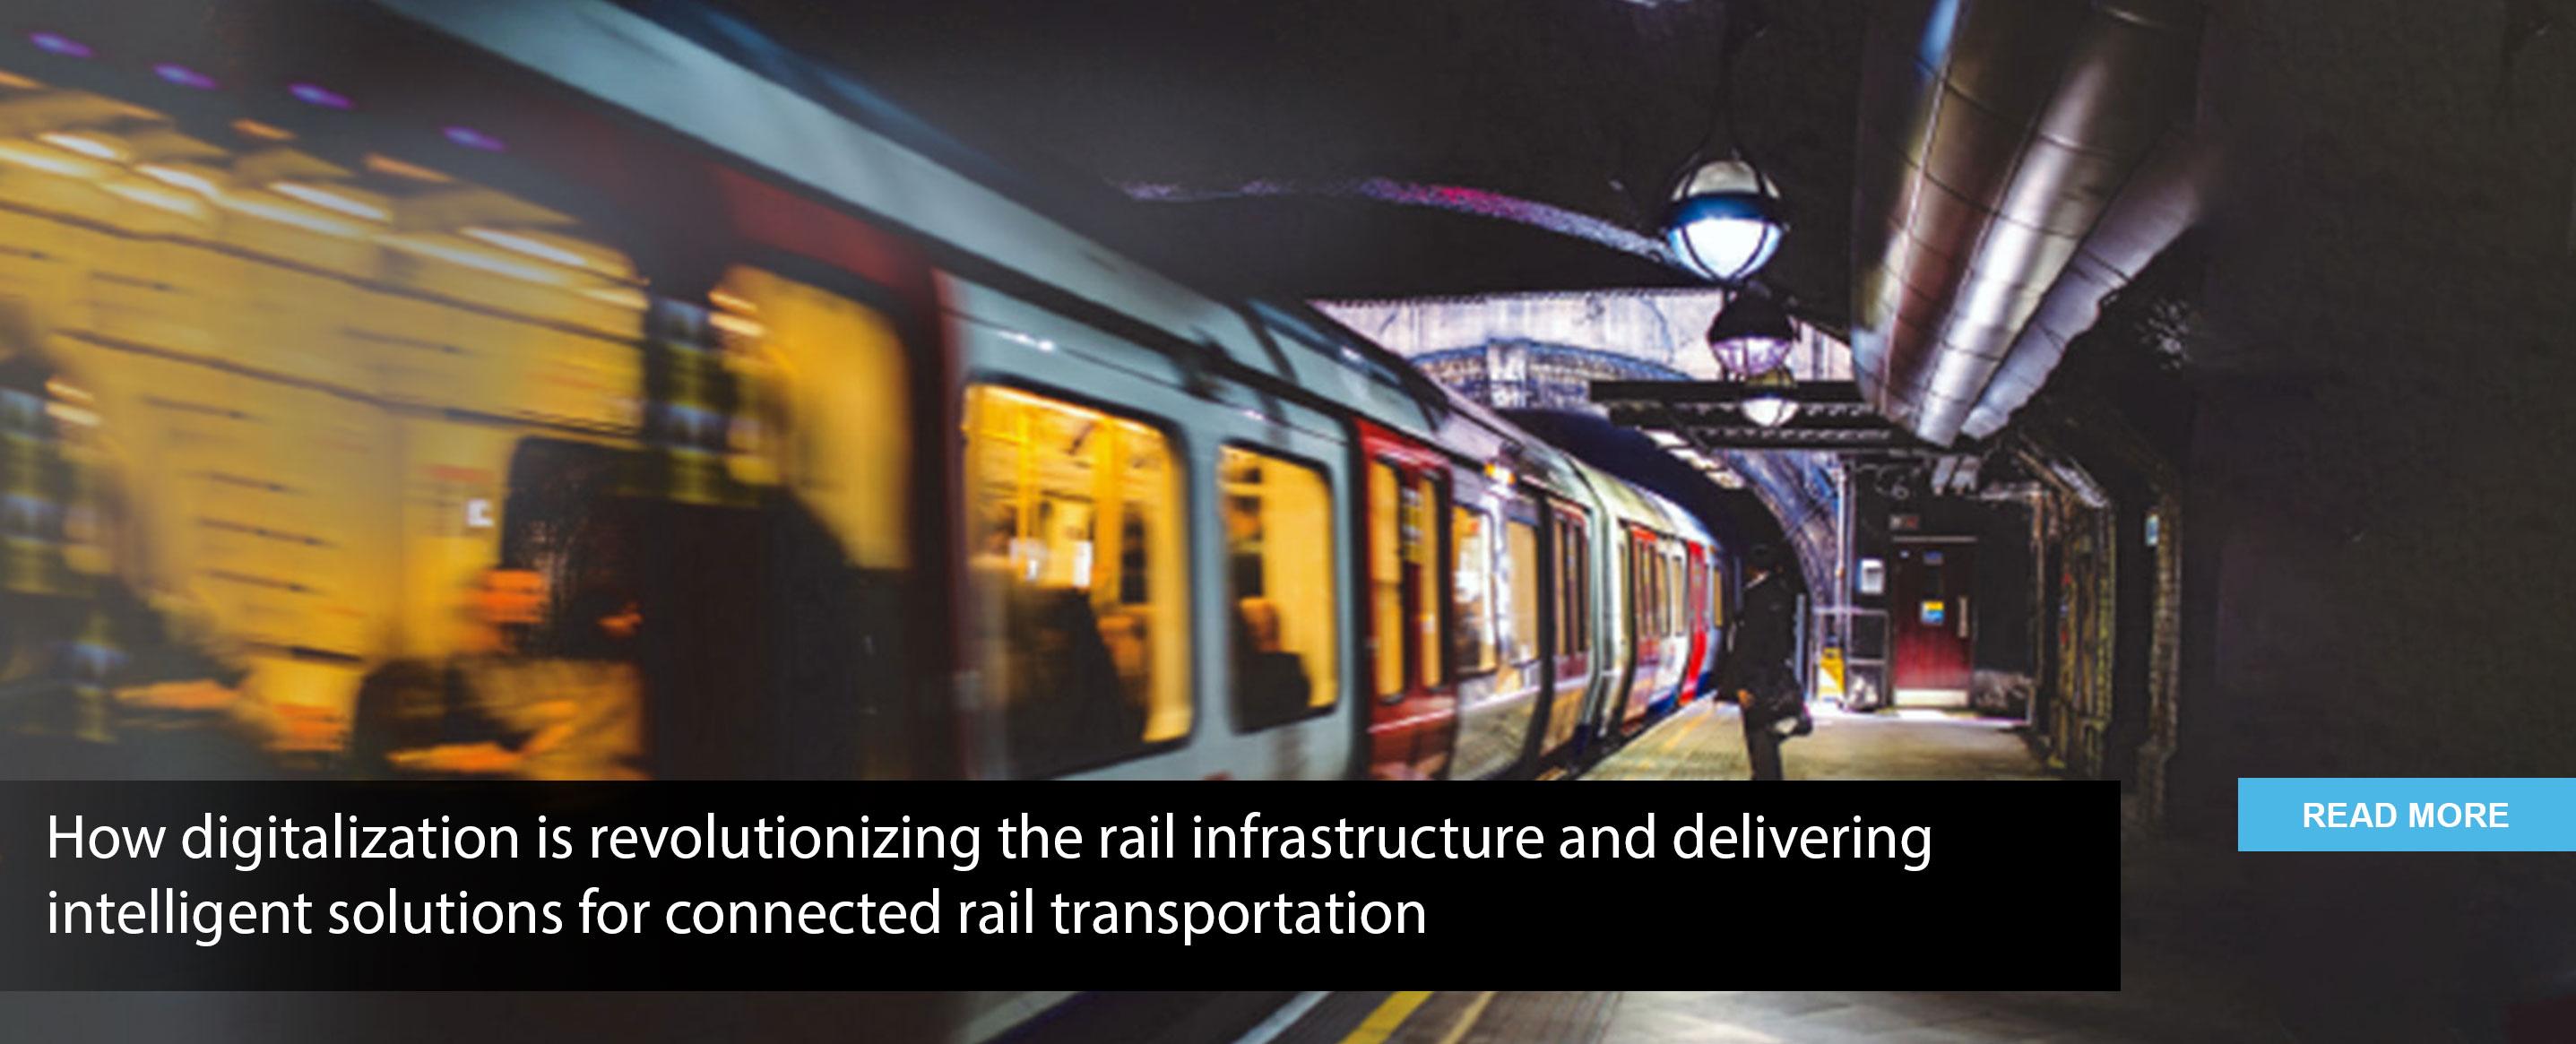 How digitalization is revolutionizing the rail infrastructure and delivering intelligent solutions for connected rail transportation